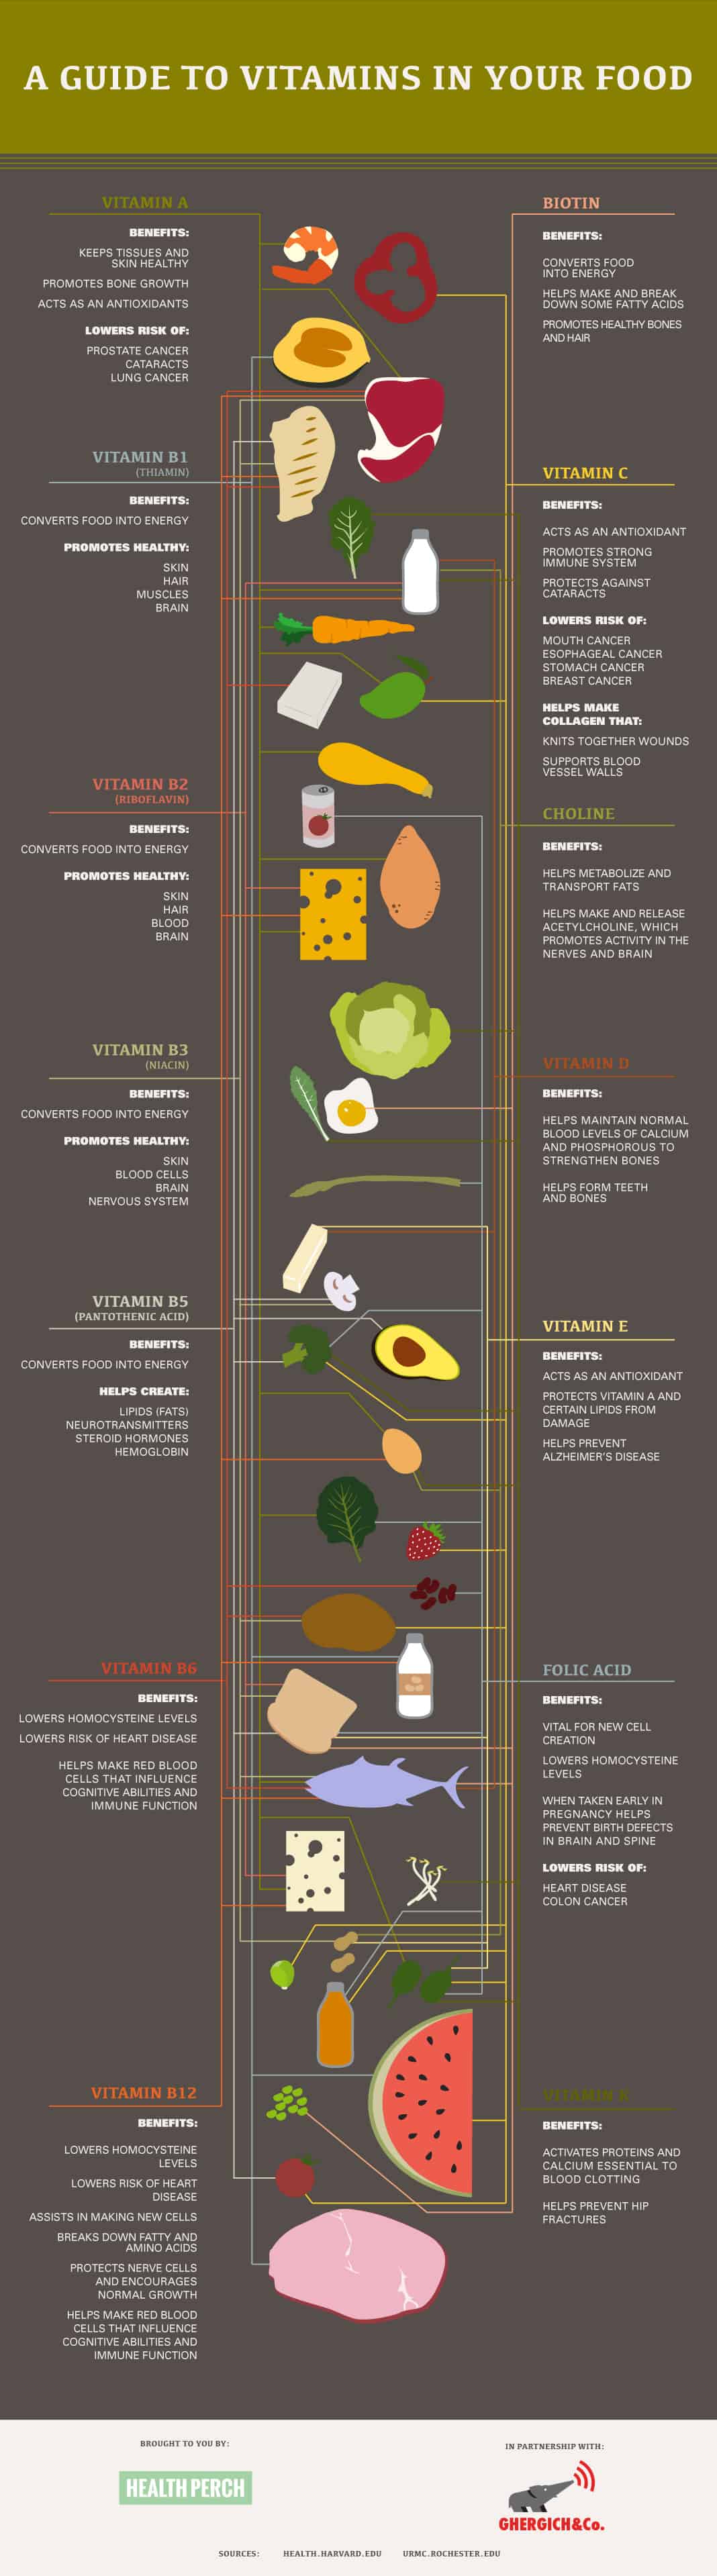 A Guide To Vitamins In Your Food Infographic